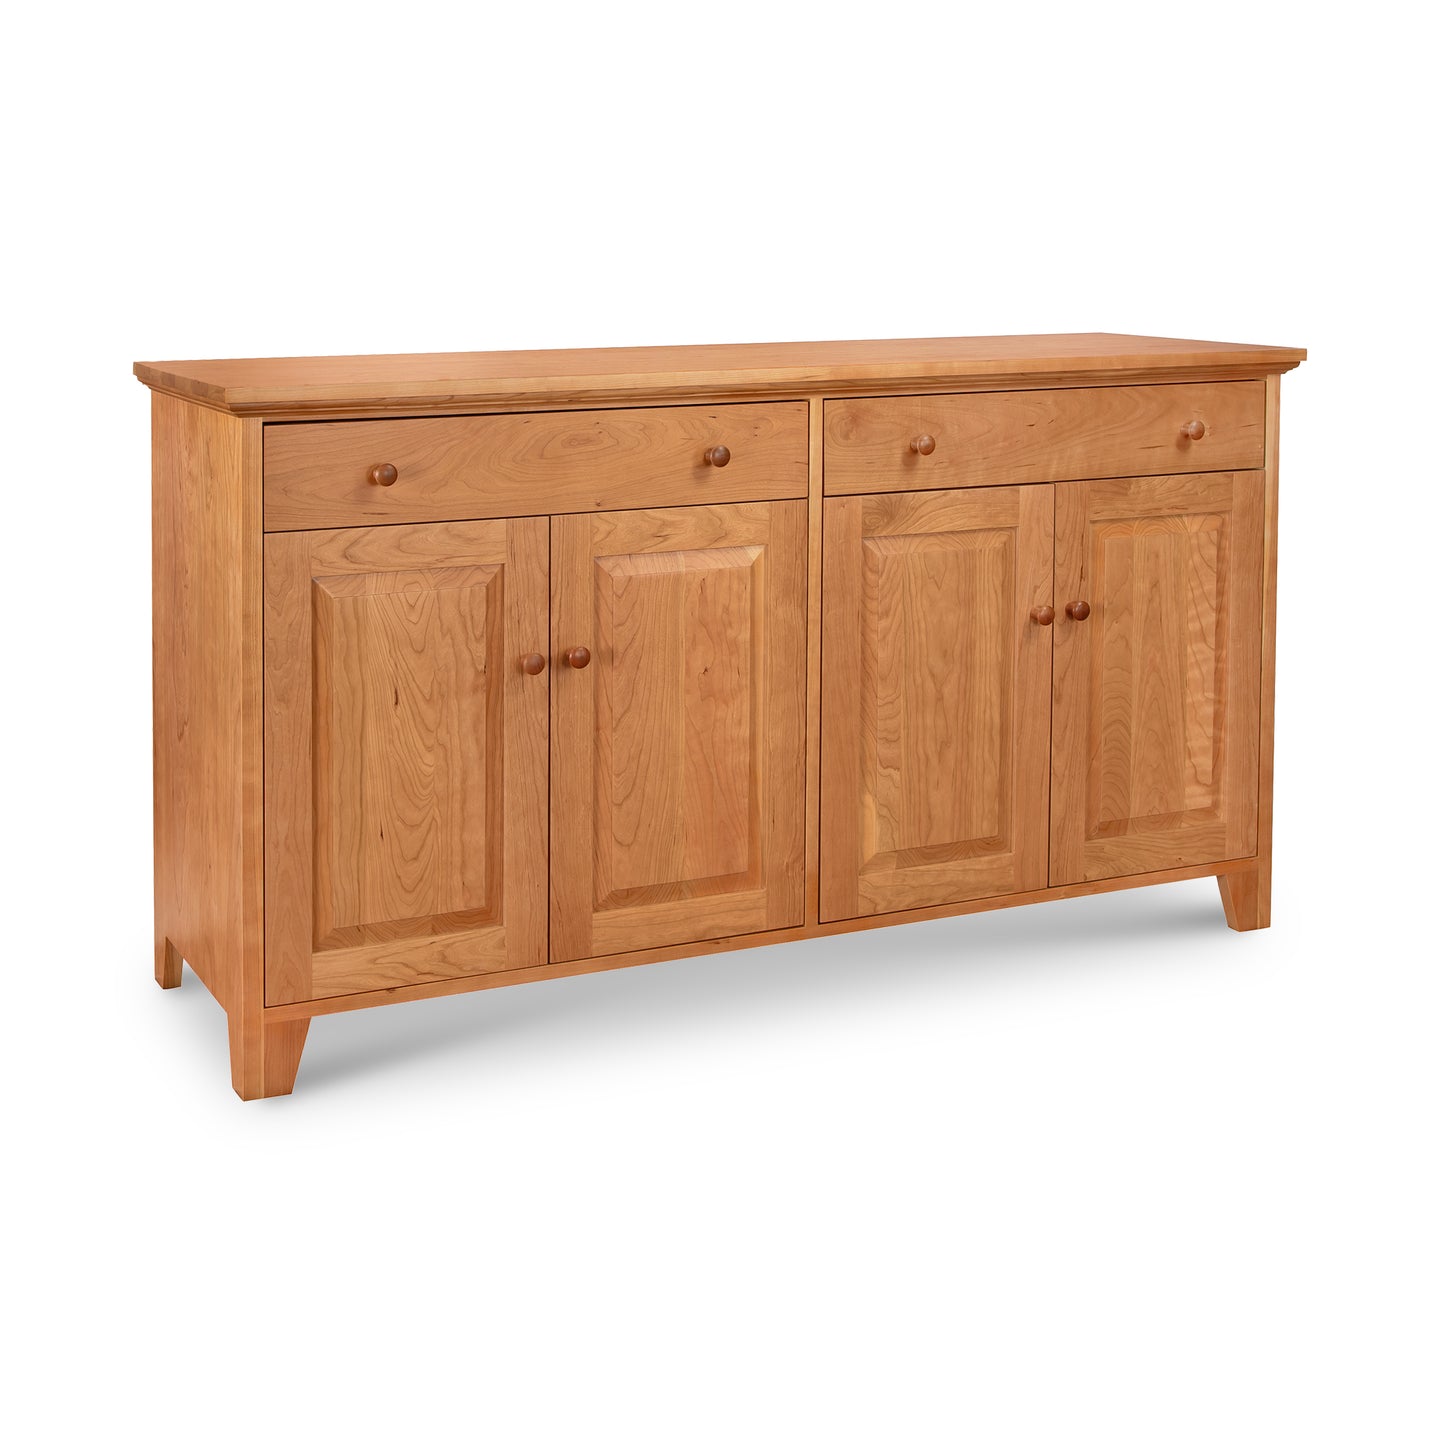 This Classic Country Buffet by Lyndon Furniture features solid hardwood construction and Vermont craftsmanship, with two doors and two drawers.